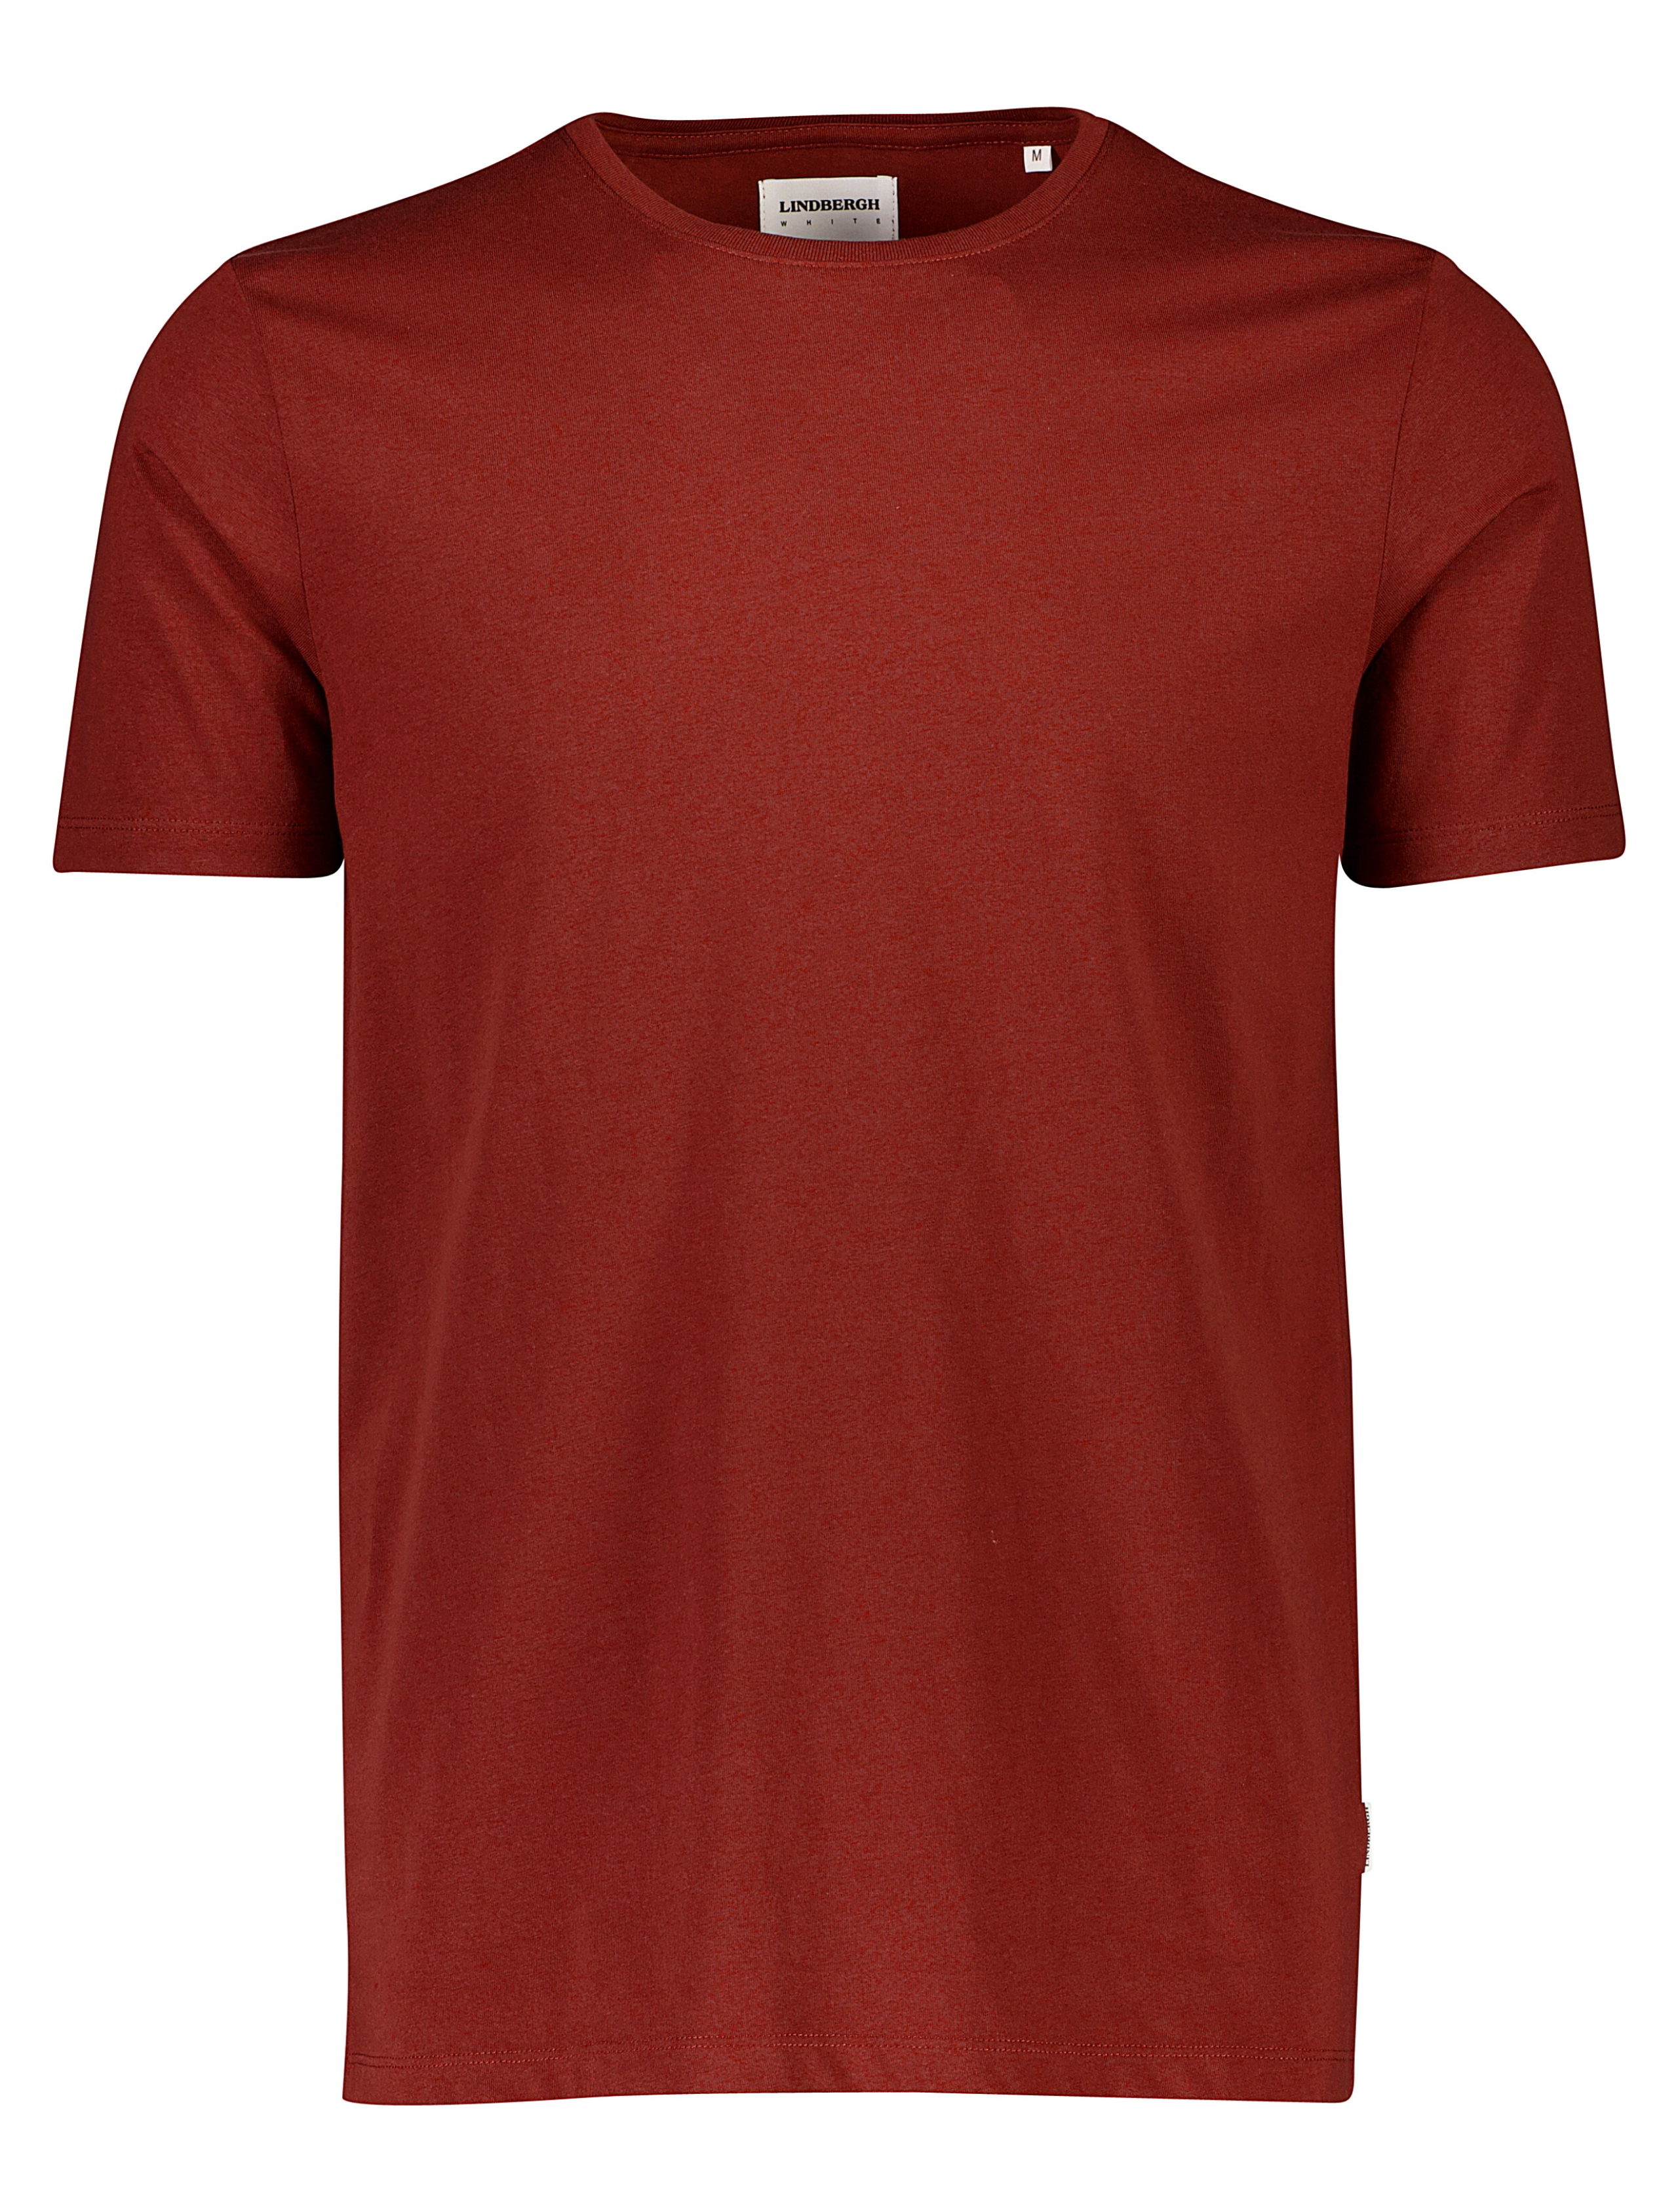 Lindbergh Tee red / burnt red mix